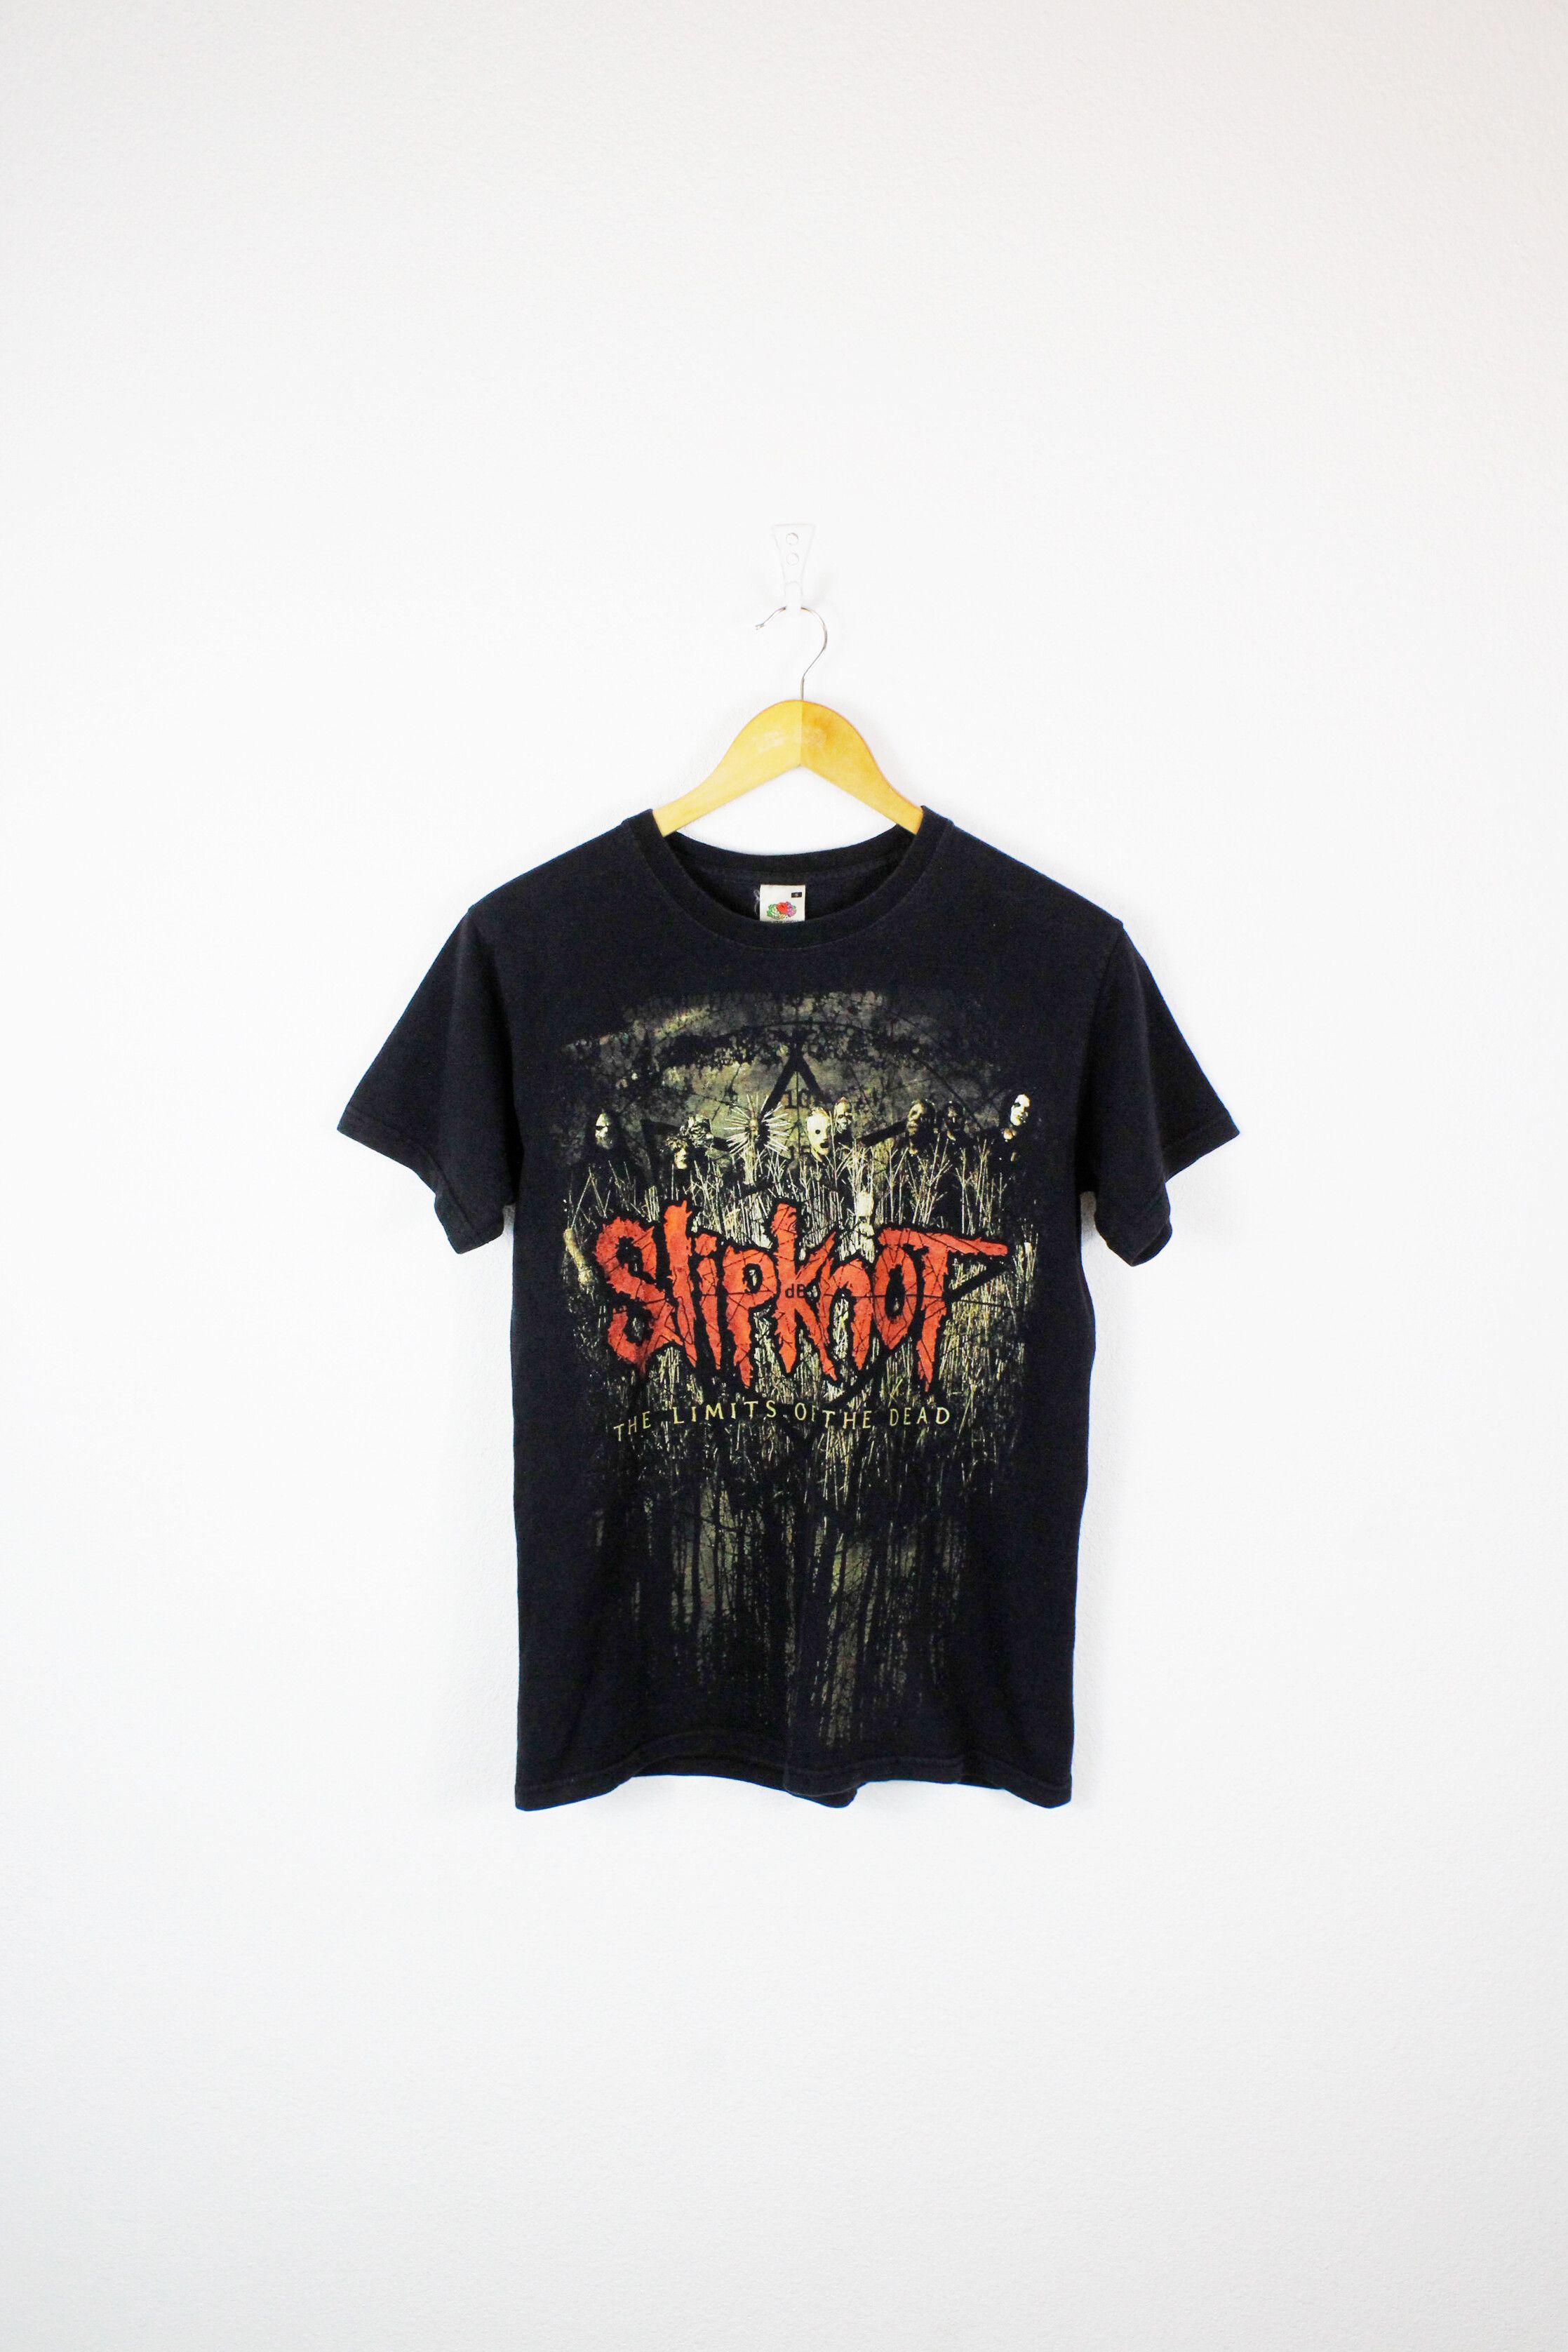 Vintage Slipknot Vintage Graphic Band Merch Tee T-shirt 90s 00s Y2K |  Grailed